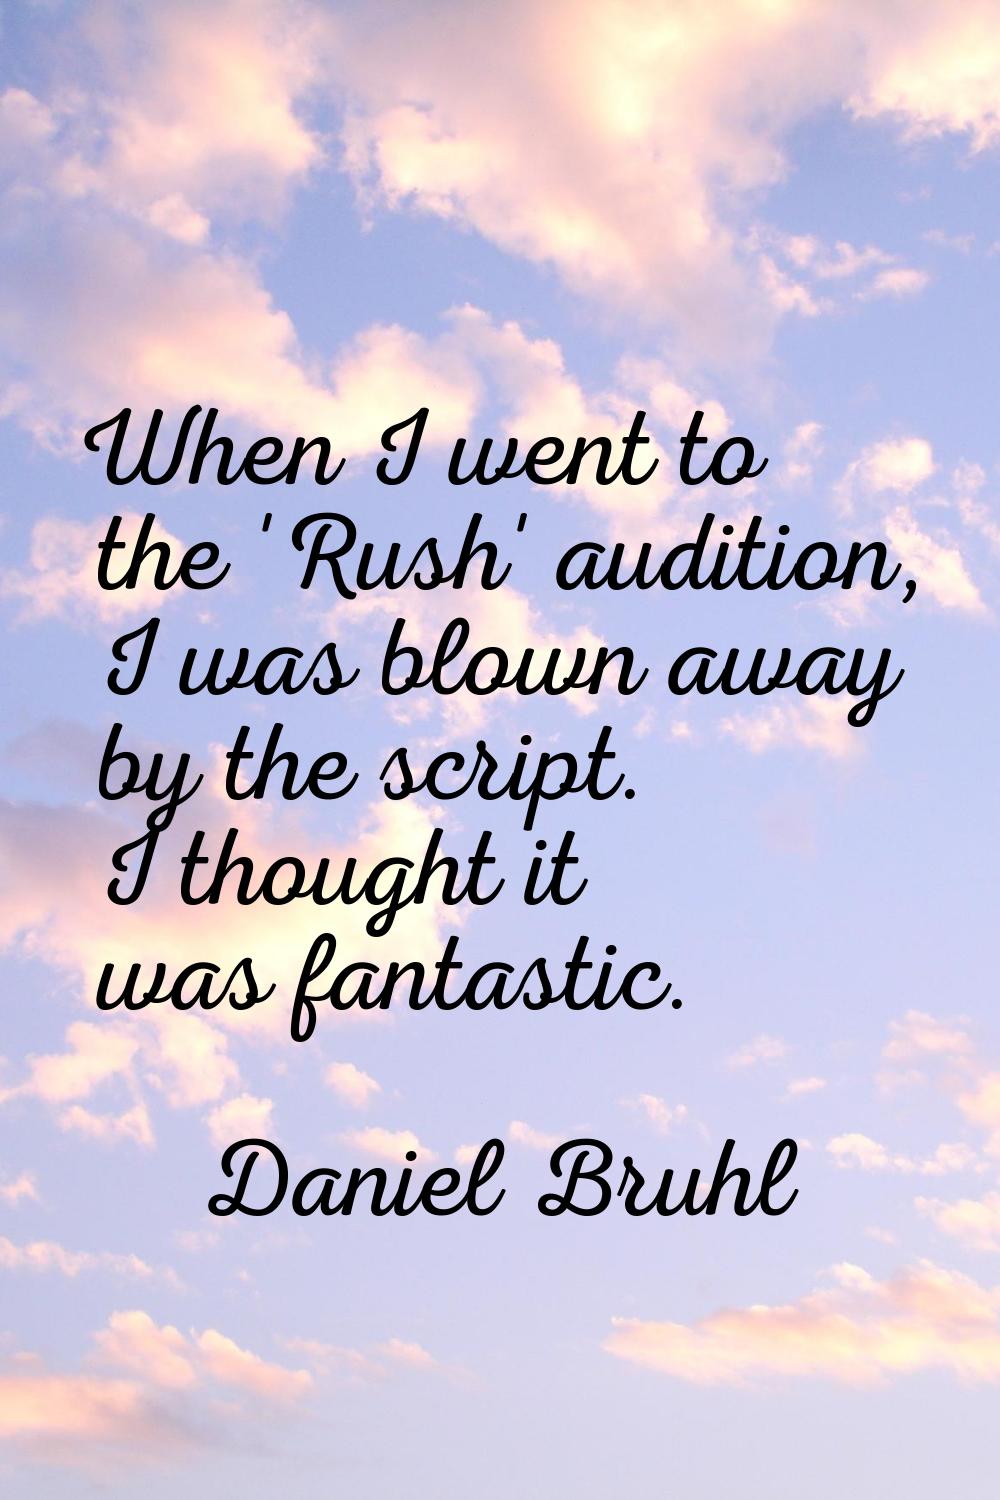 When I went to the 'Rush' audition, I was blown away by the script. I thought it was fantastic.